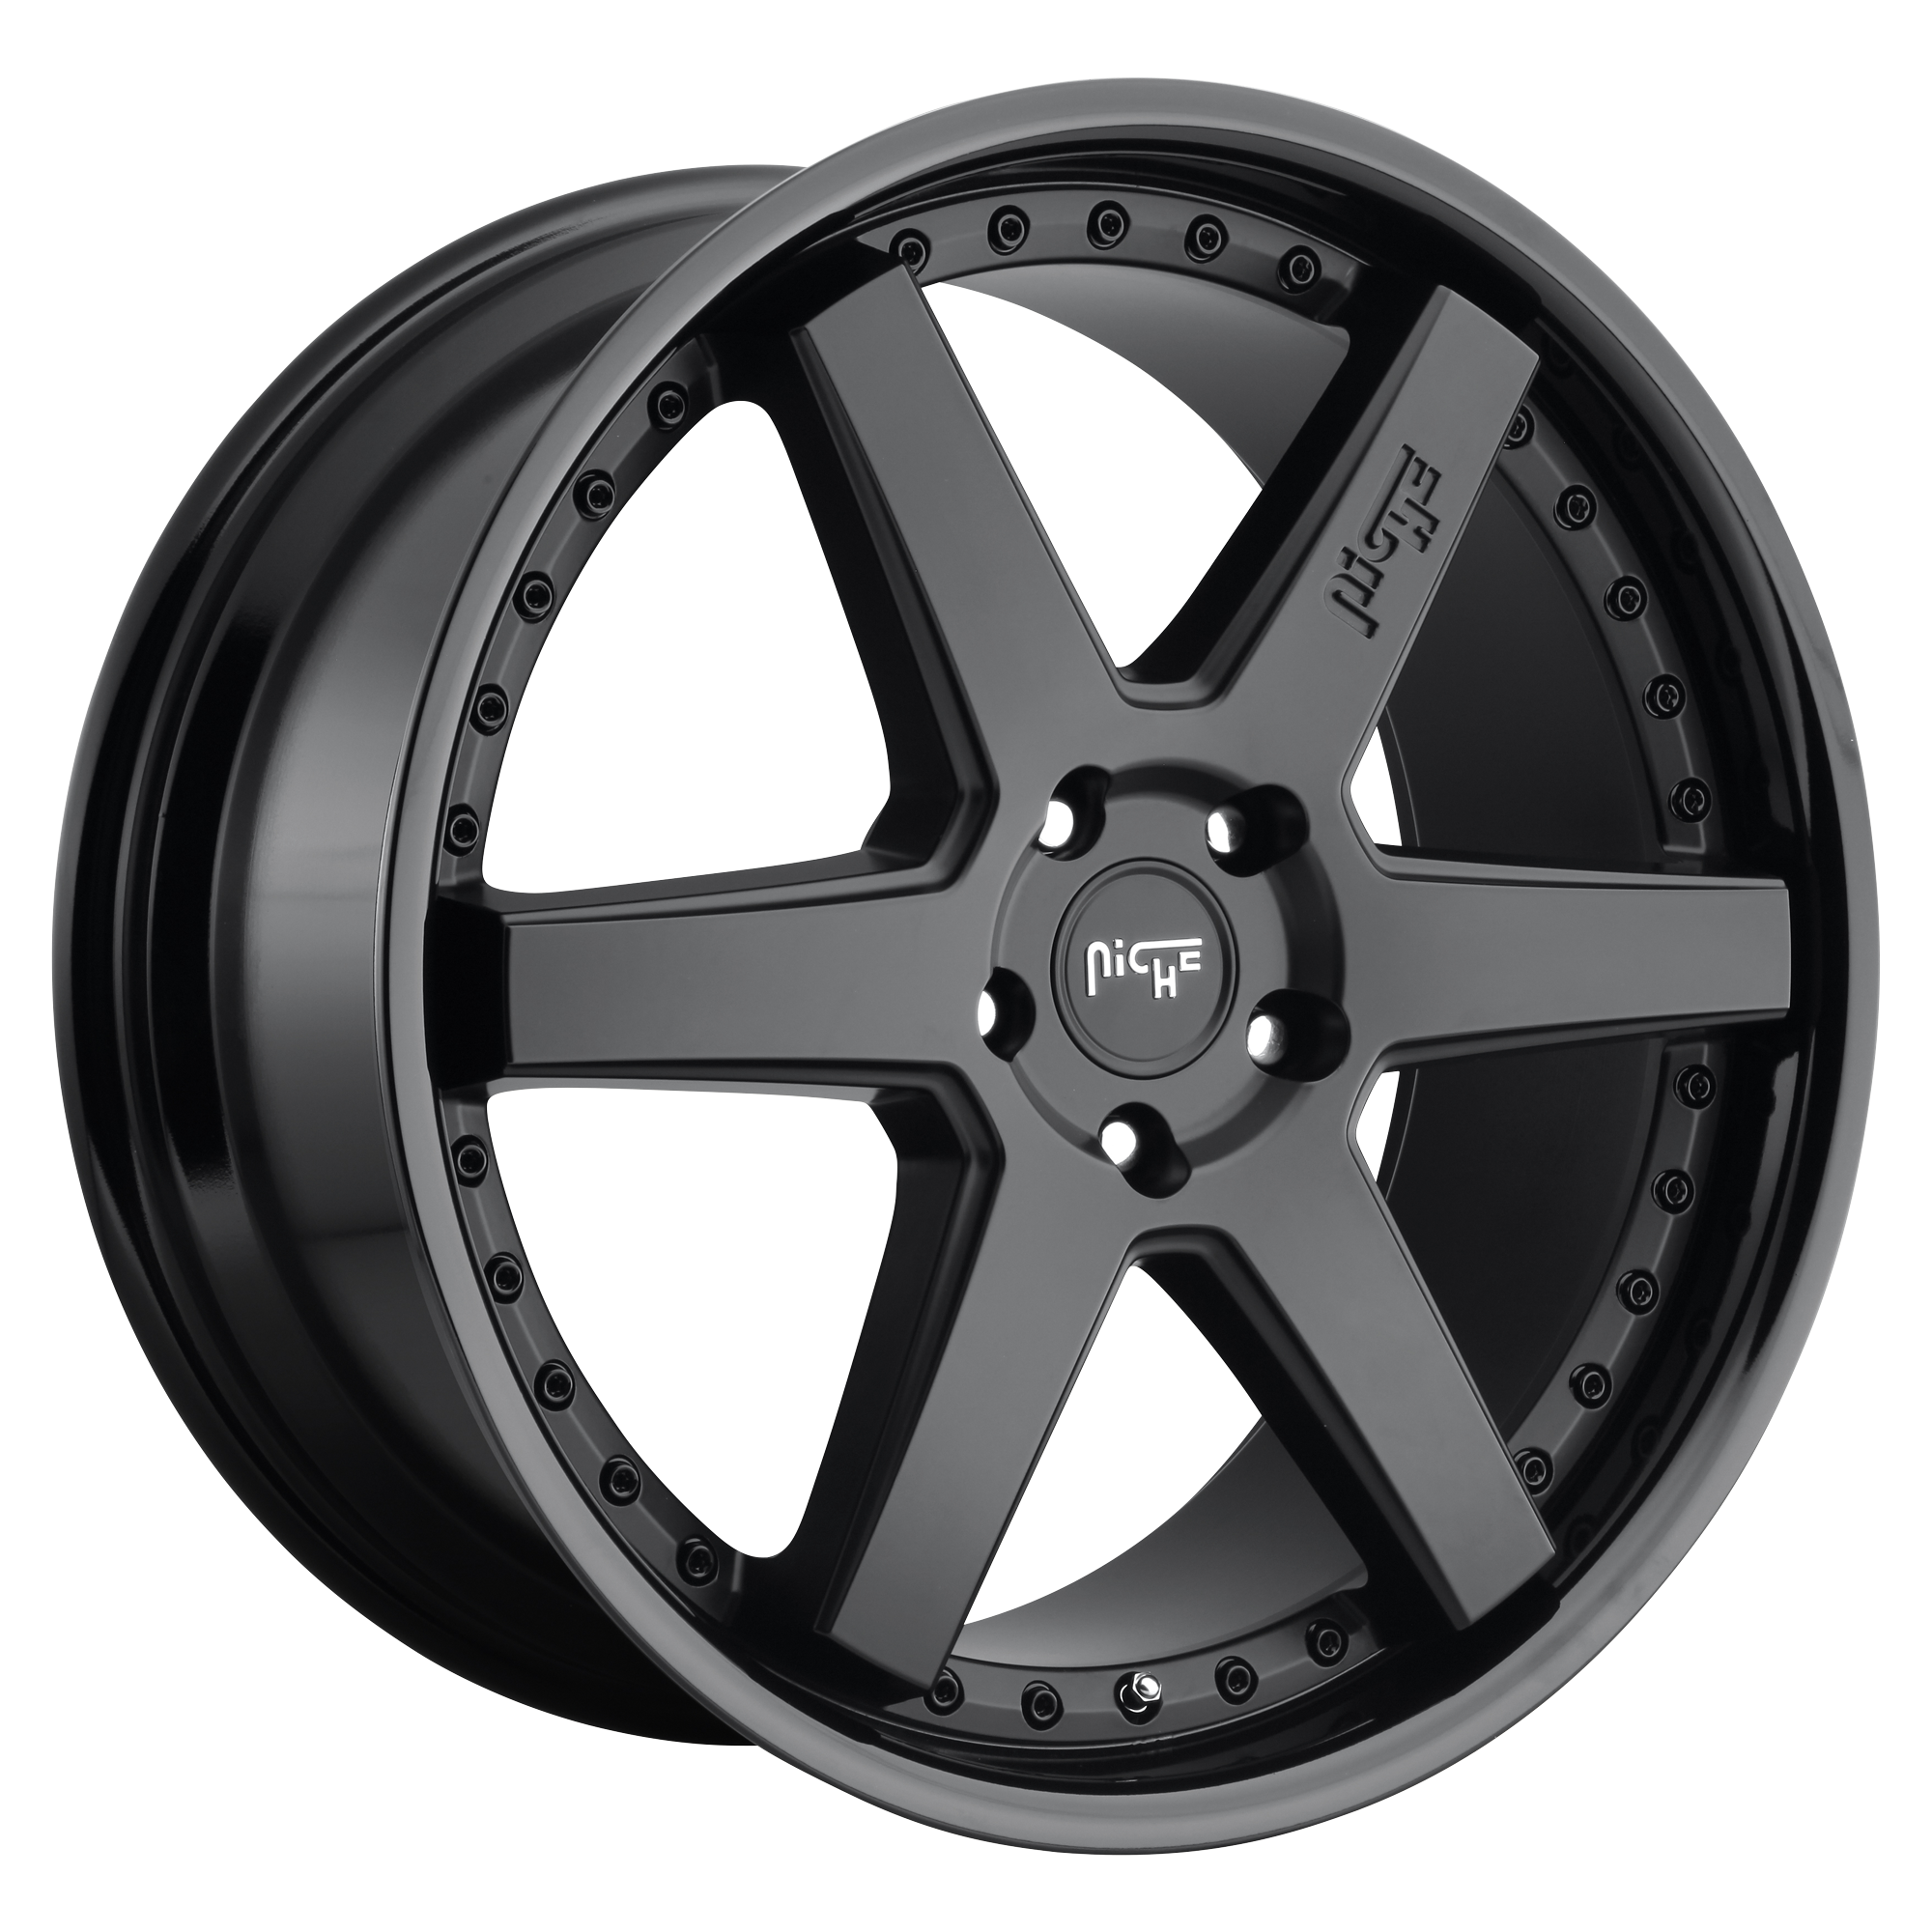 ALTAIR 18x8.5 5x108.00 GLOSS BLACK MATTE BLACK (40 mm) - Tires and Engine Performance